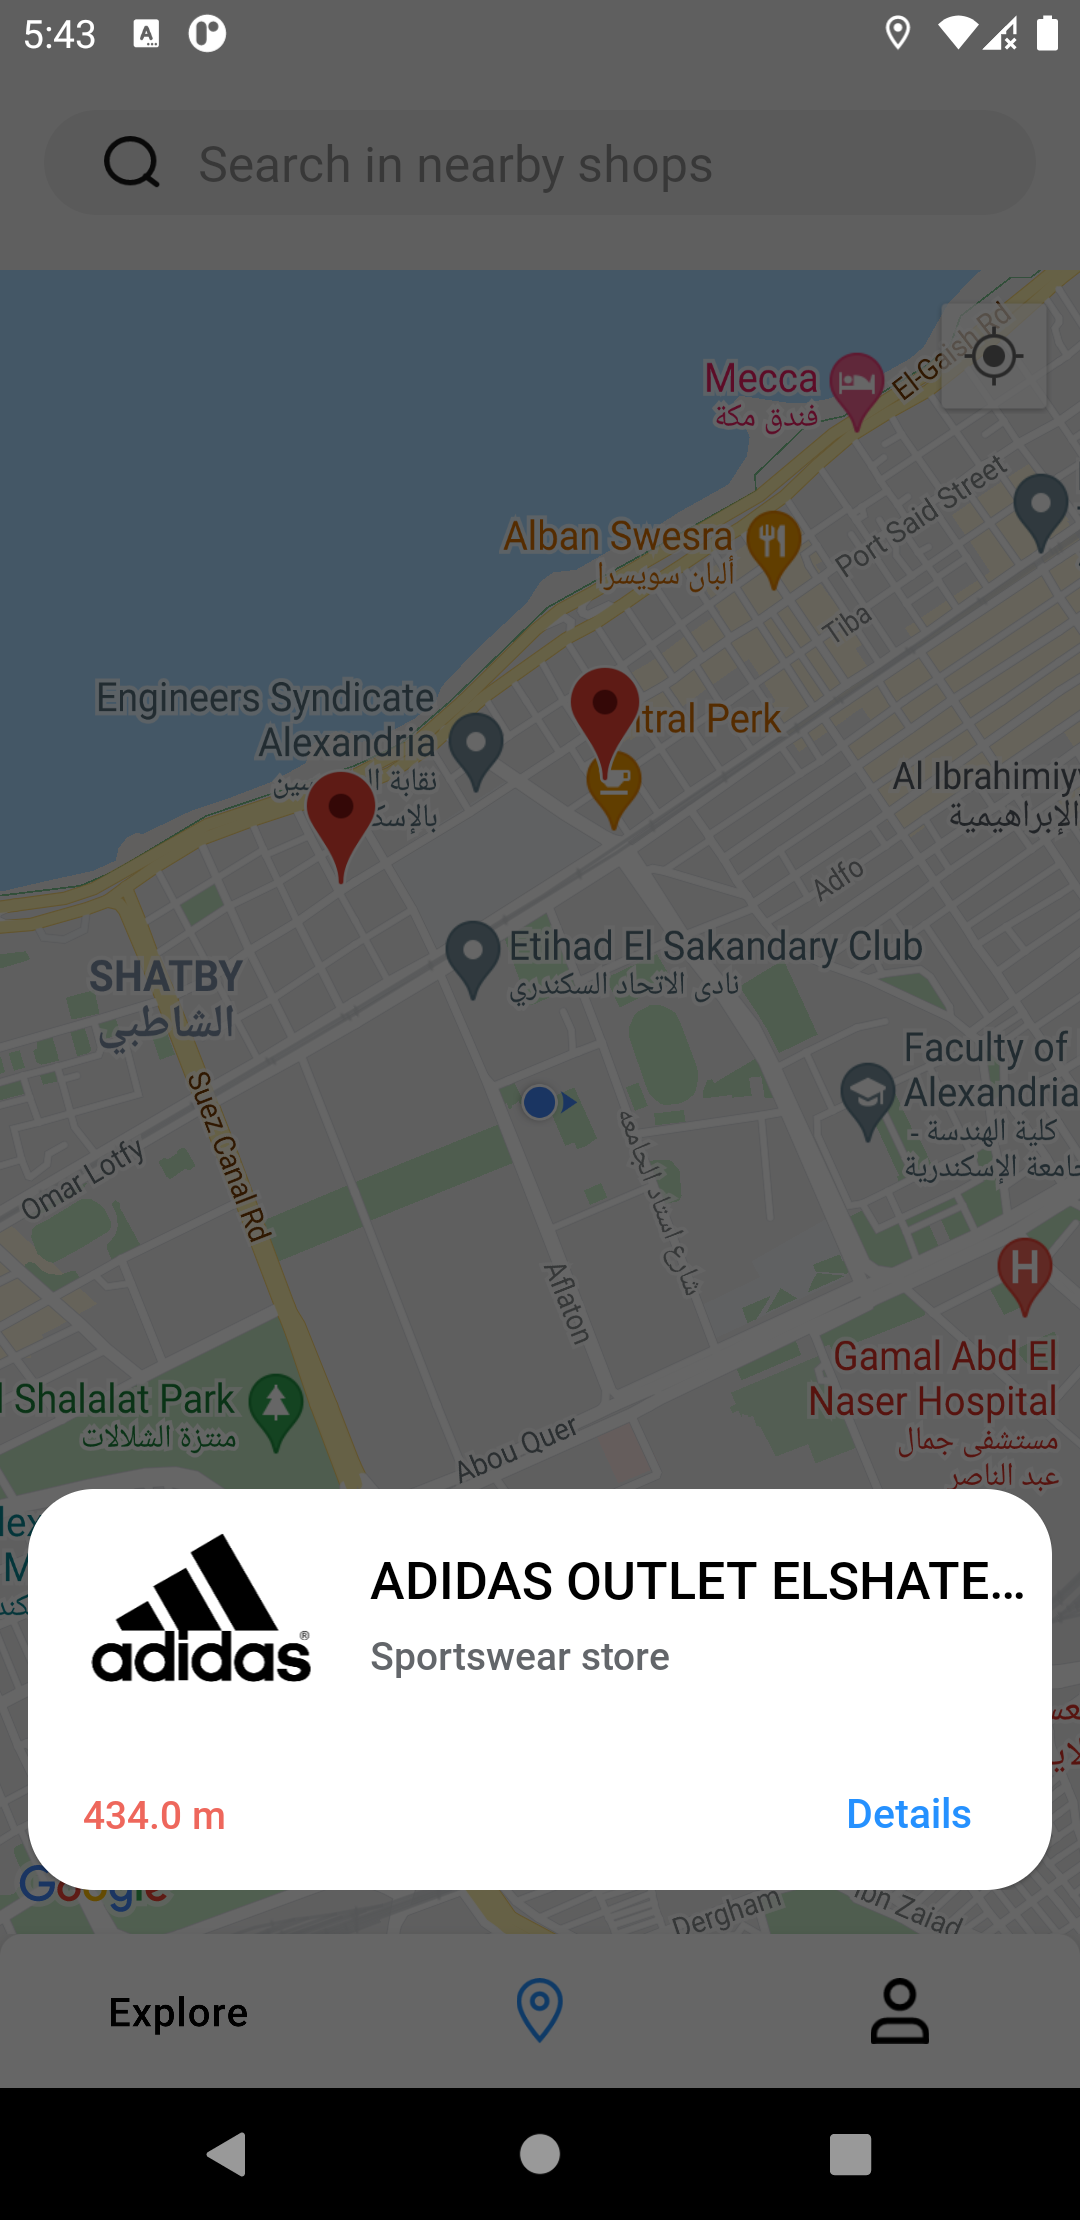 5 - Nearby shops screen 2.png